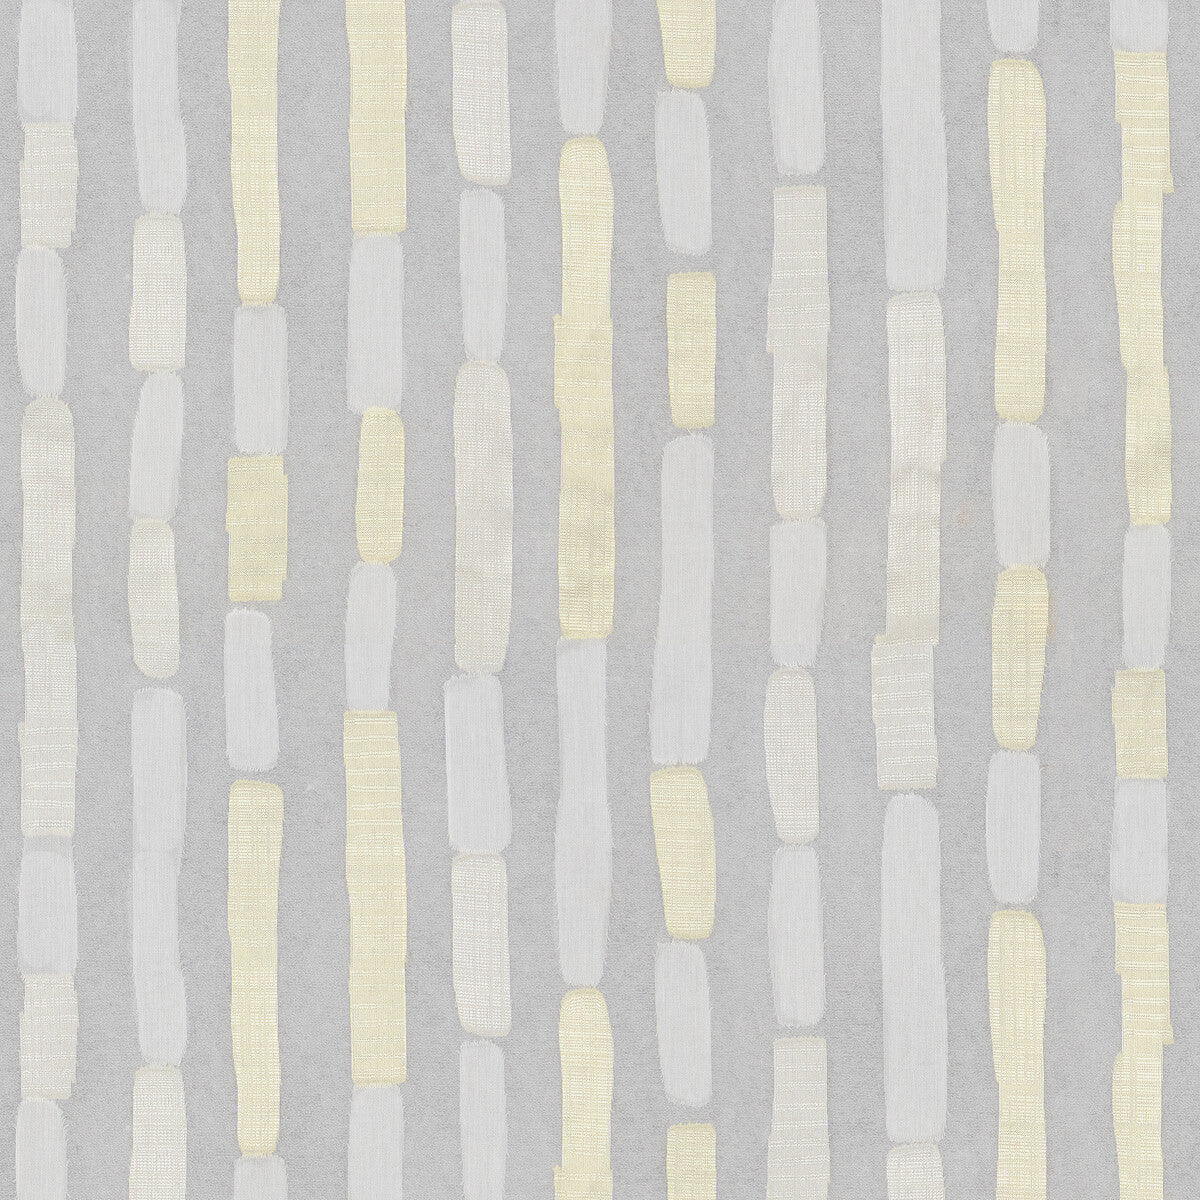 Kravet Contract fabric in 4527-11 color - pattern 4527.11.0 - by Kravet Contract